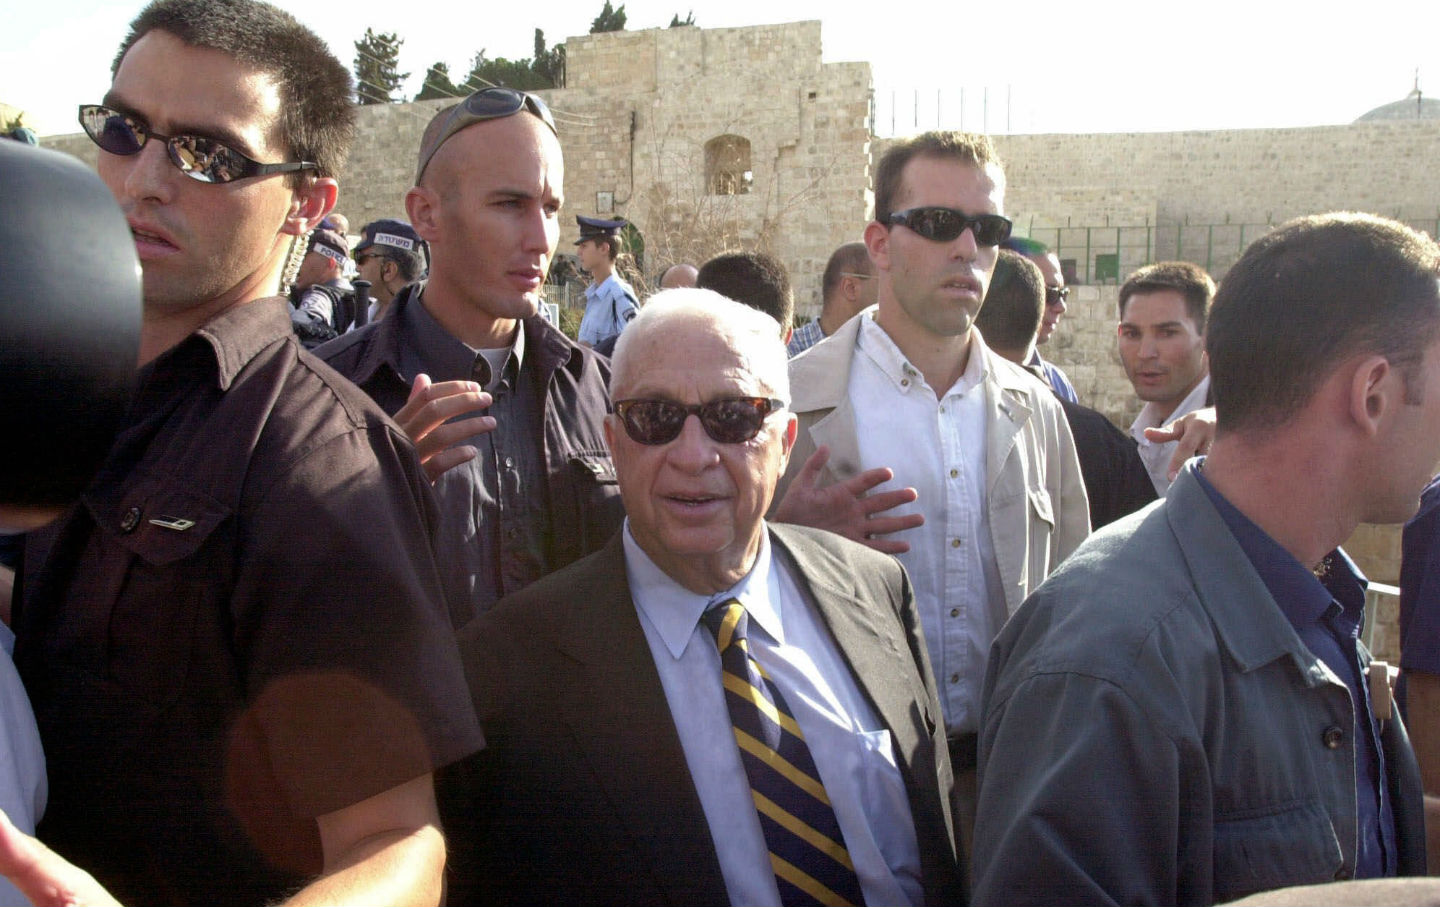 September 28, 2000: Ariel Sharon Visits the Temple Mount, Sparking the Second Intifada